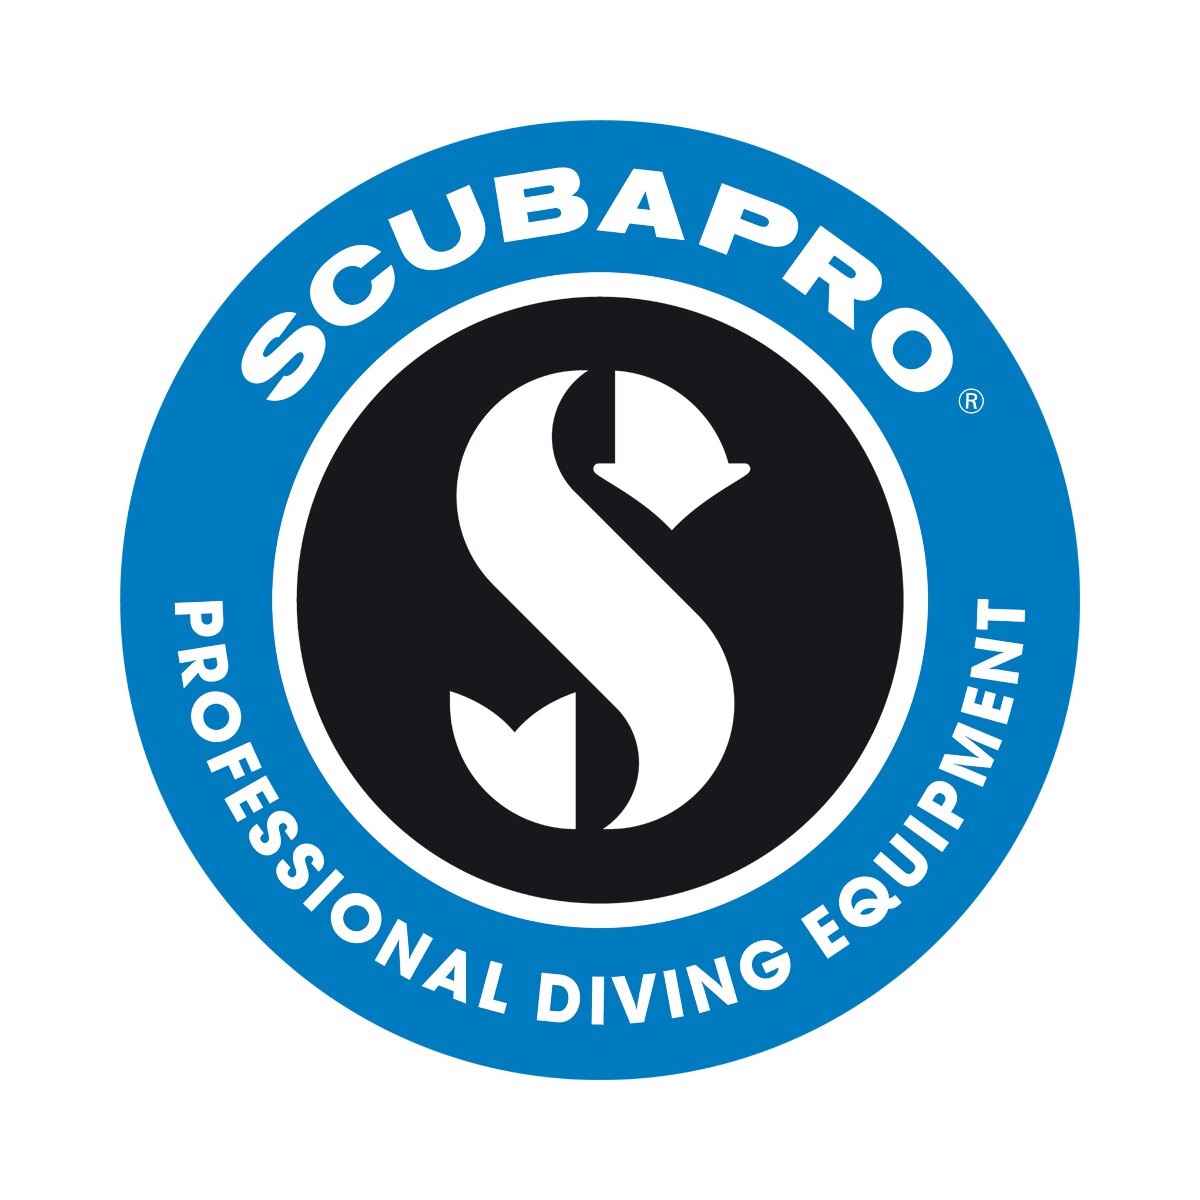 NEW** Scubapro Diving Regulator at your own request